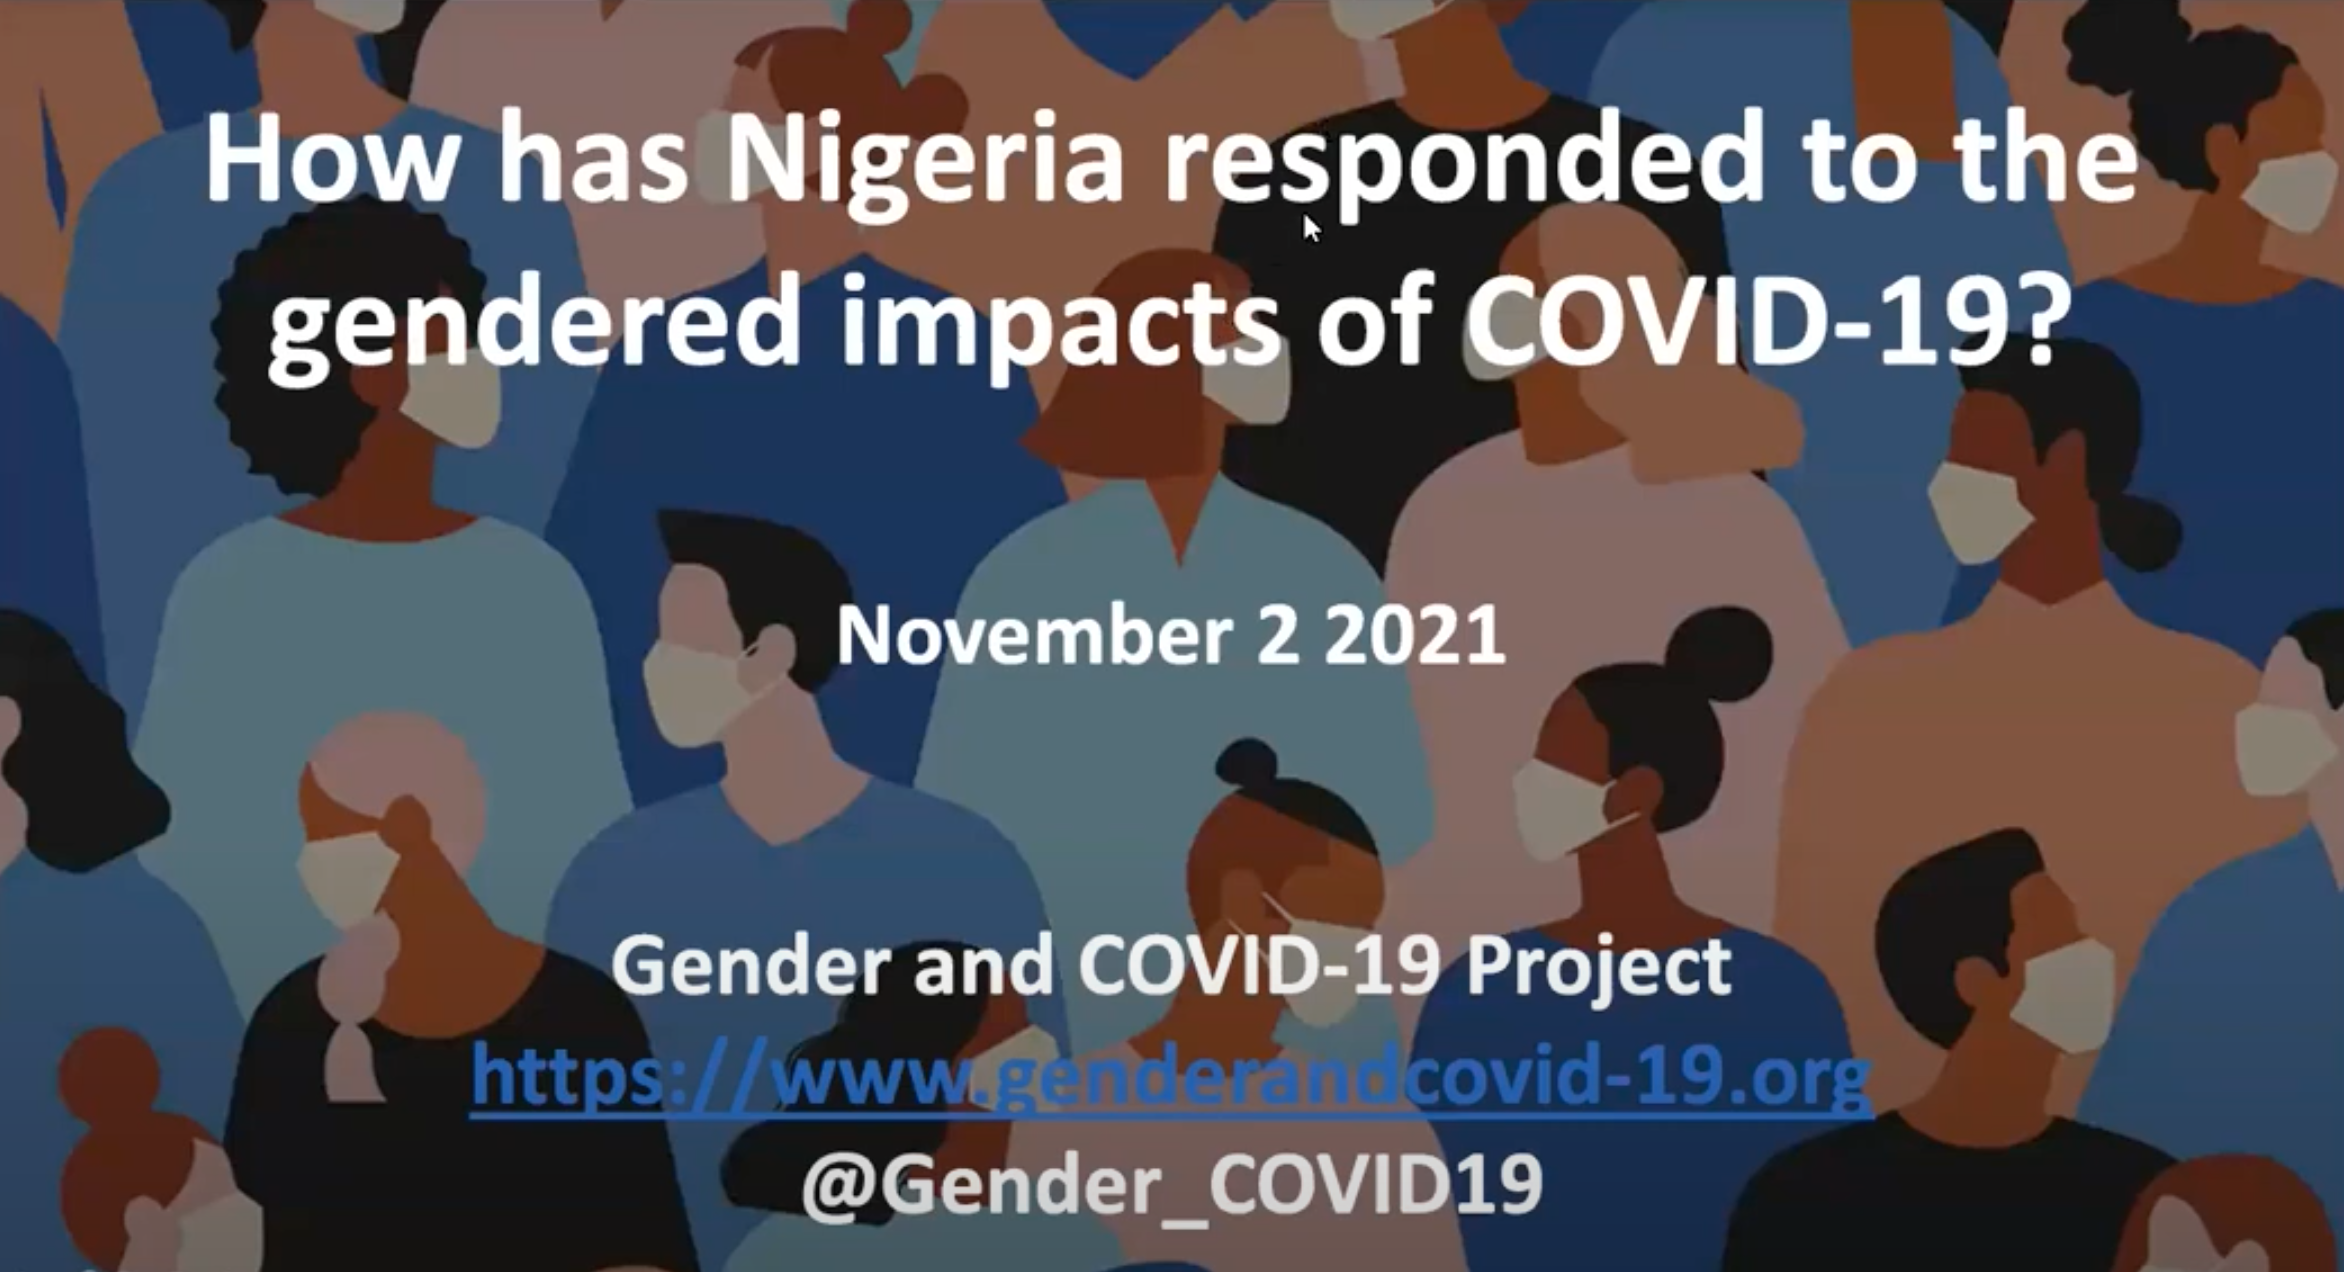 How has Nigeria responded to the gendered impacts of COVID 19?